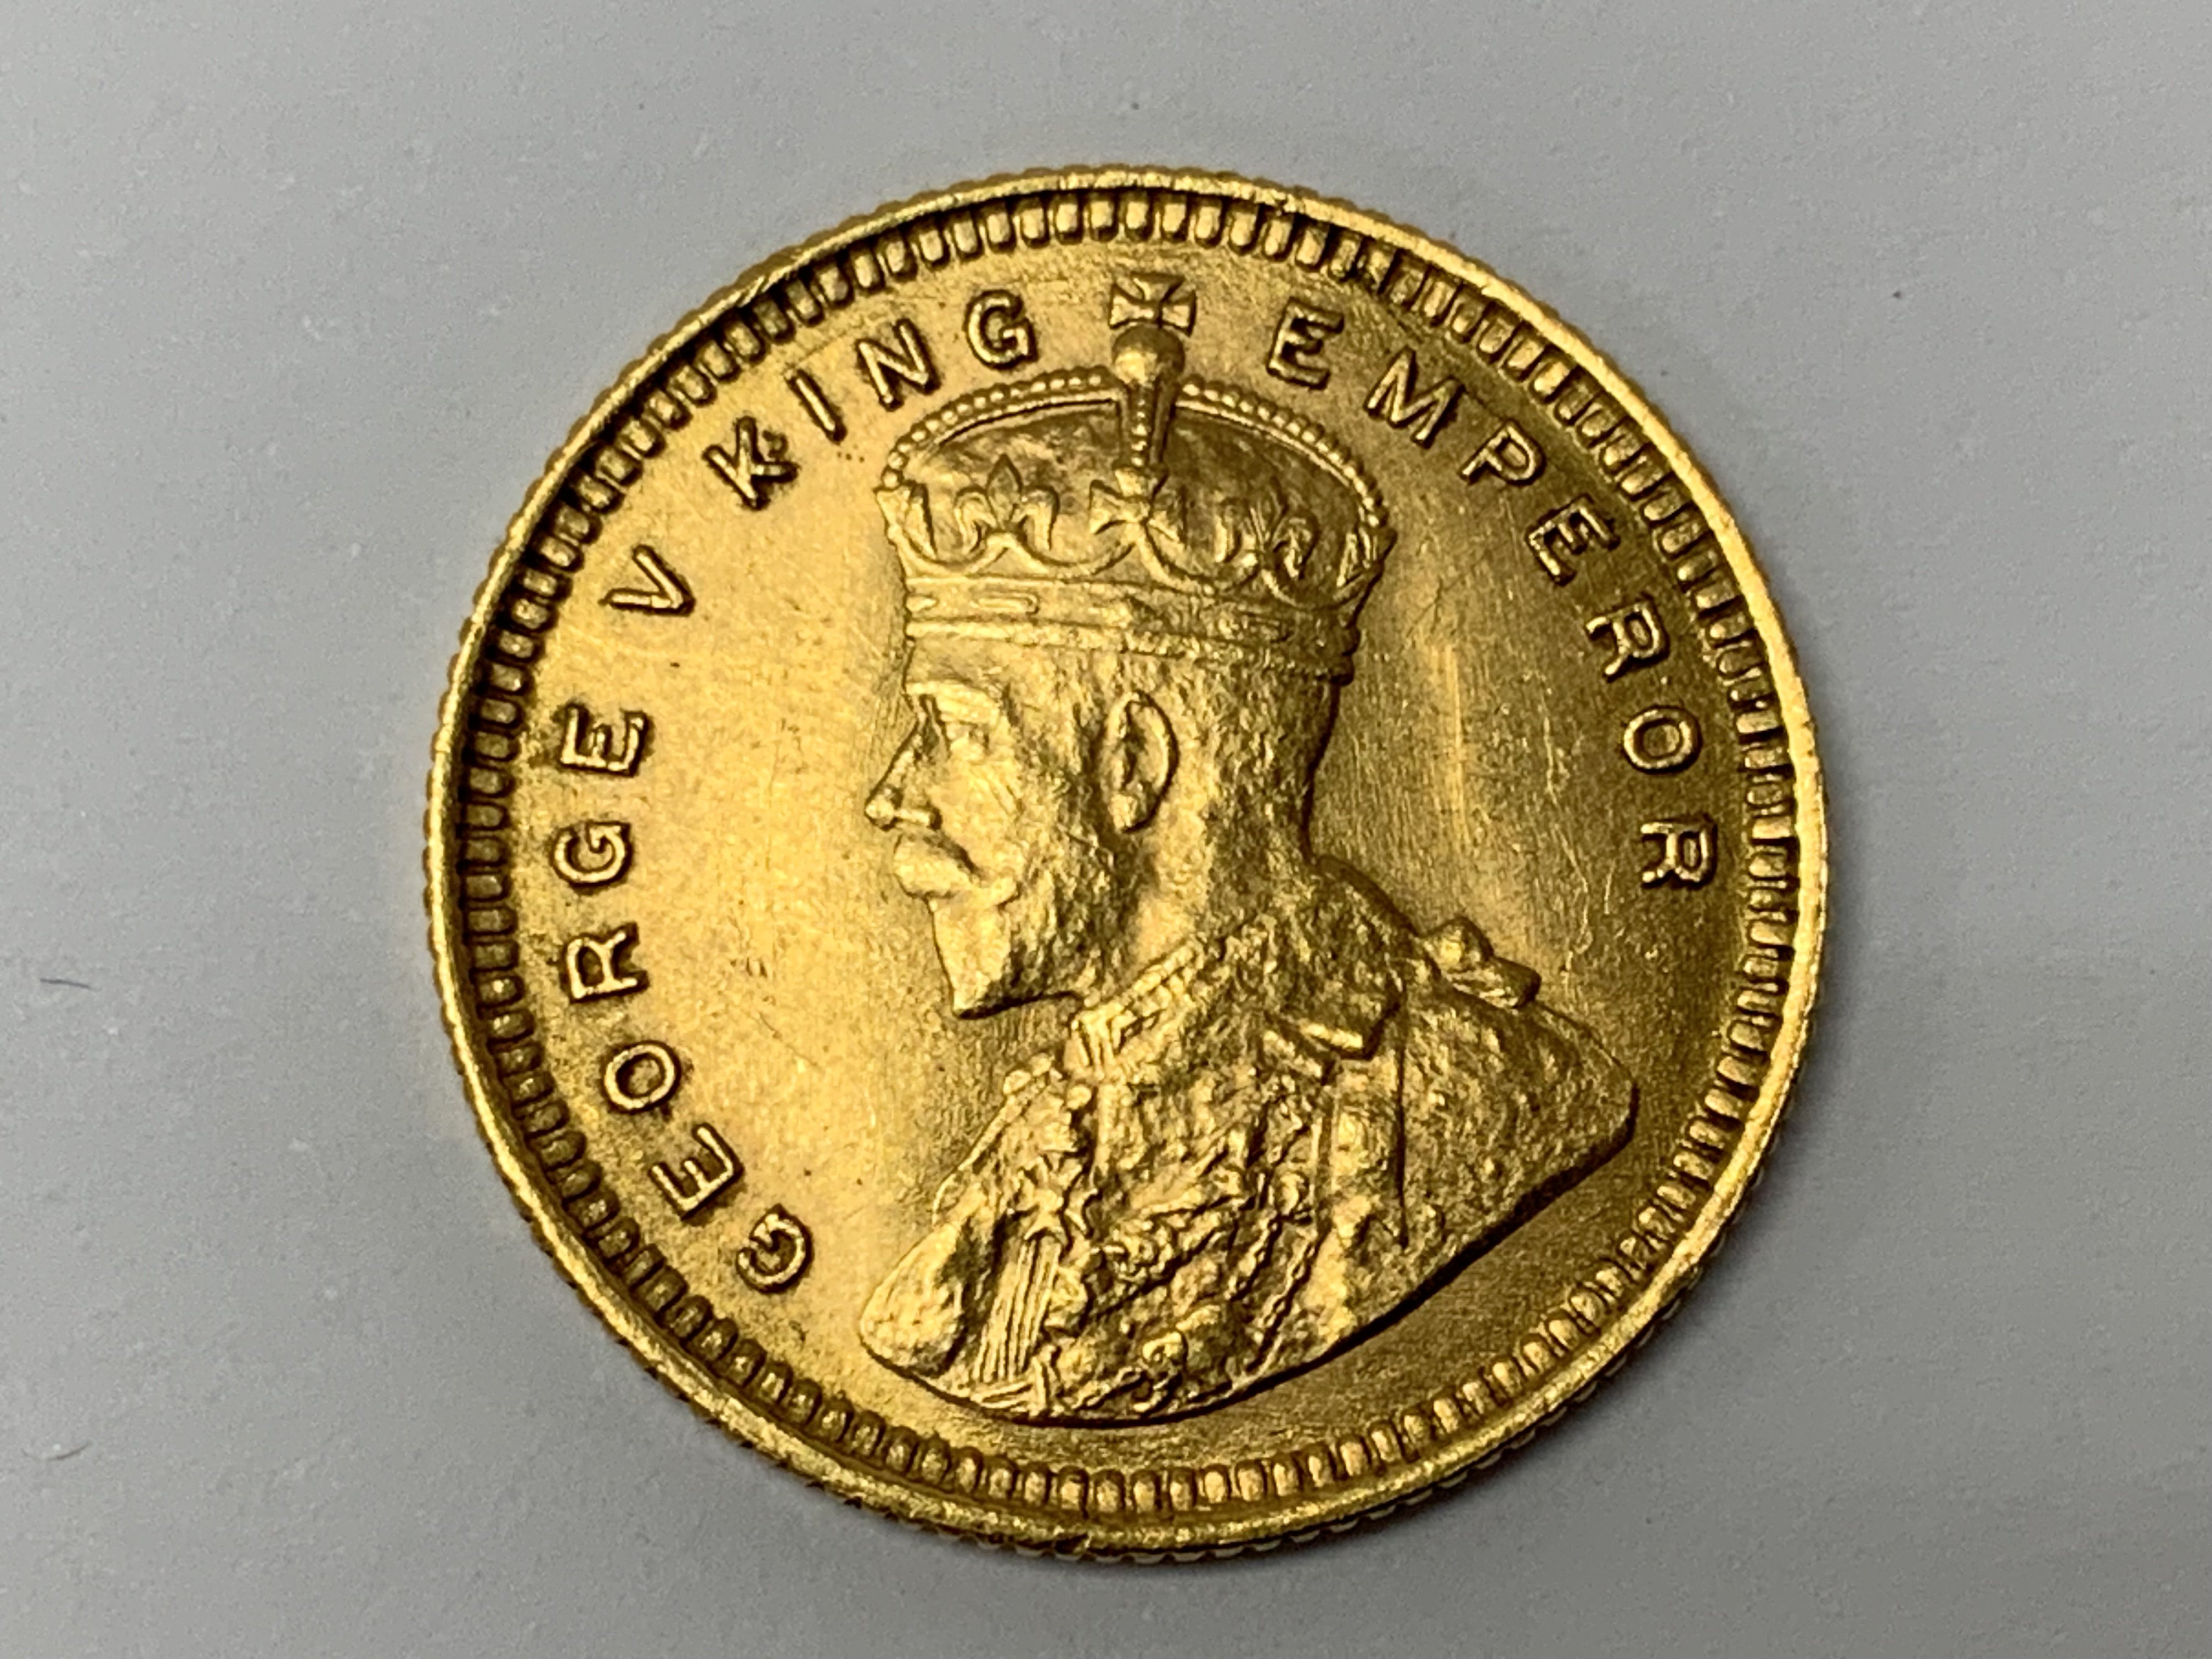 1918 15 Rupees Crowned bust of King George V, faci